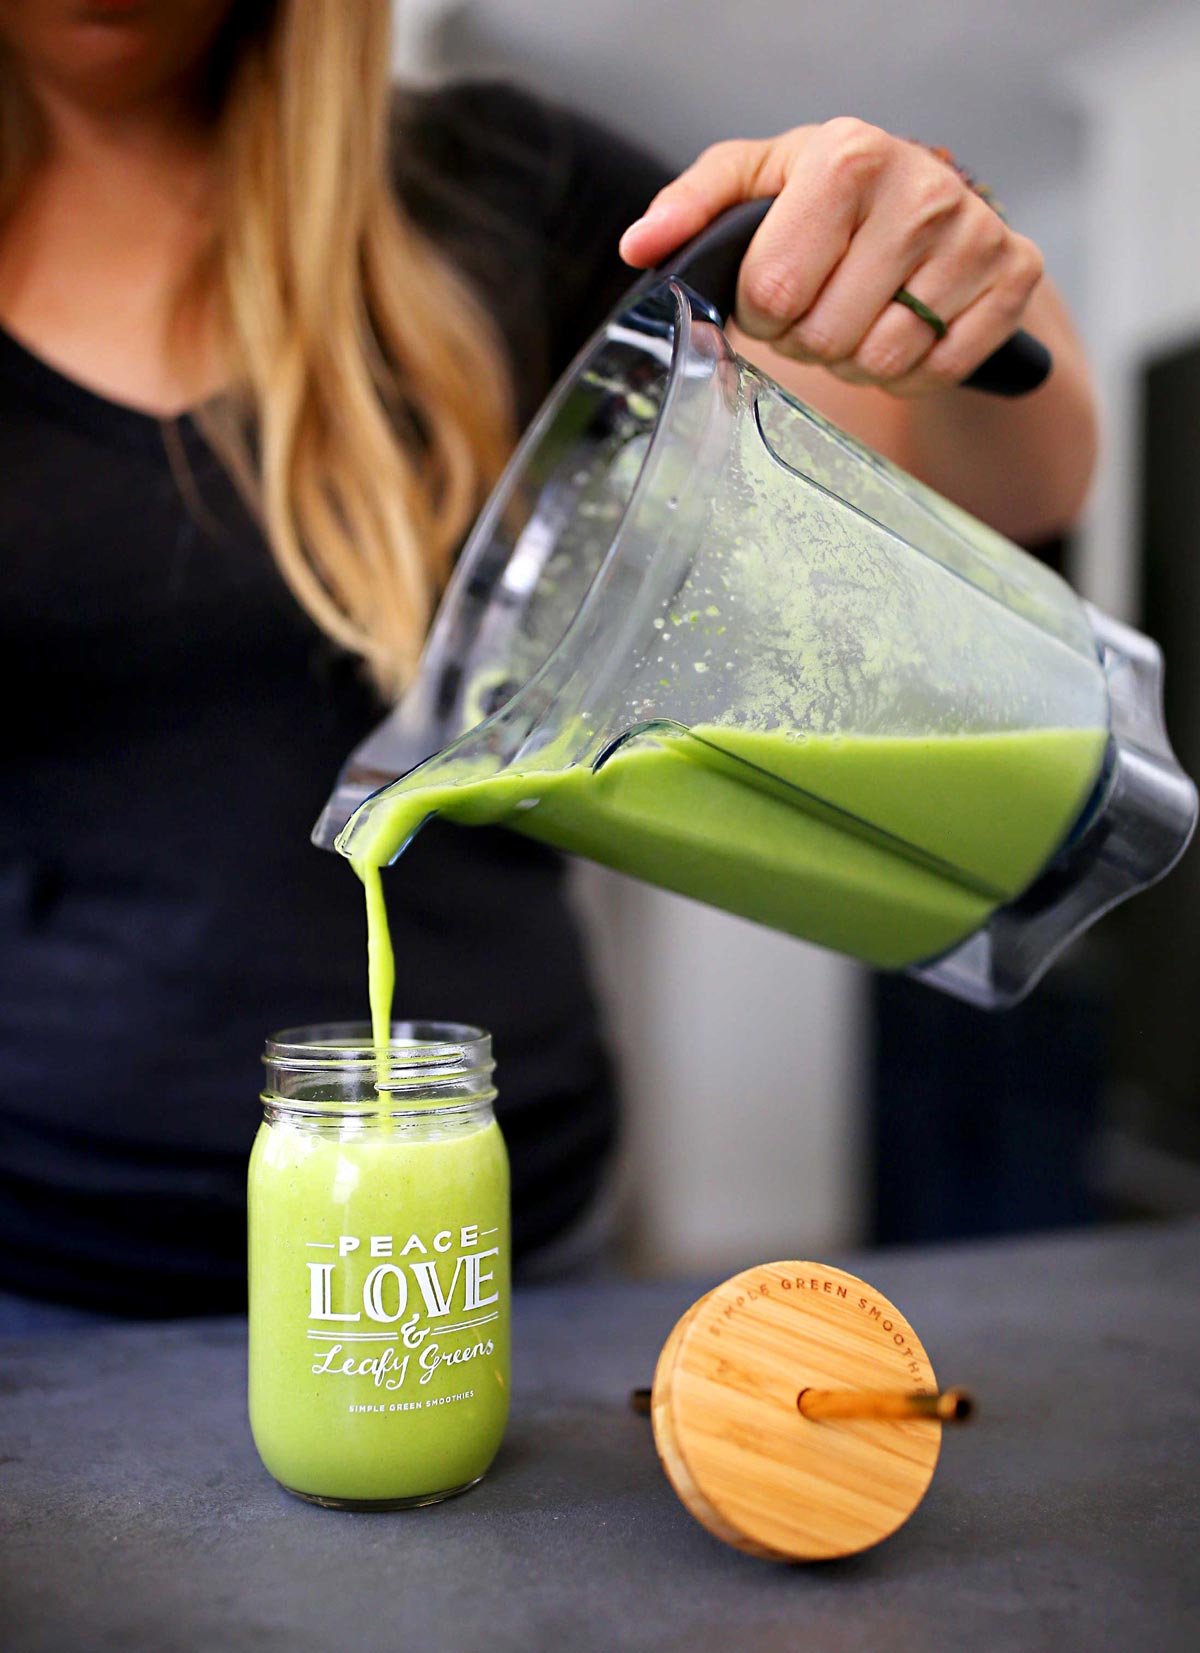 A large blender container full of green smoothie being poured into a glass jar with the words Peace Love & Leafy Greens written on it next to a wooden lid and metal straw.